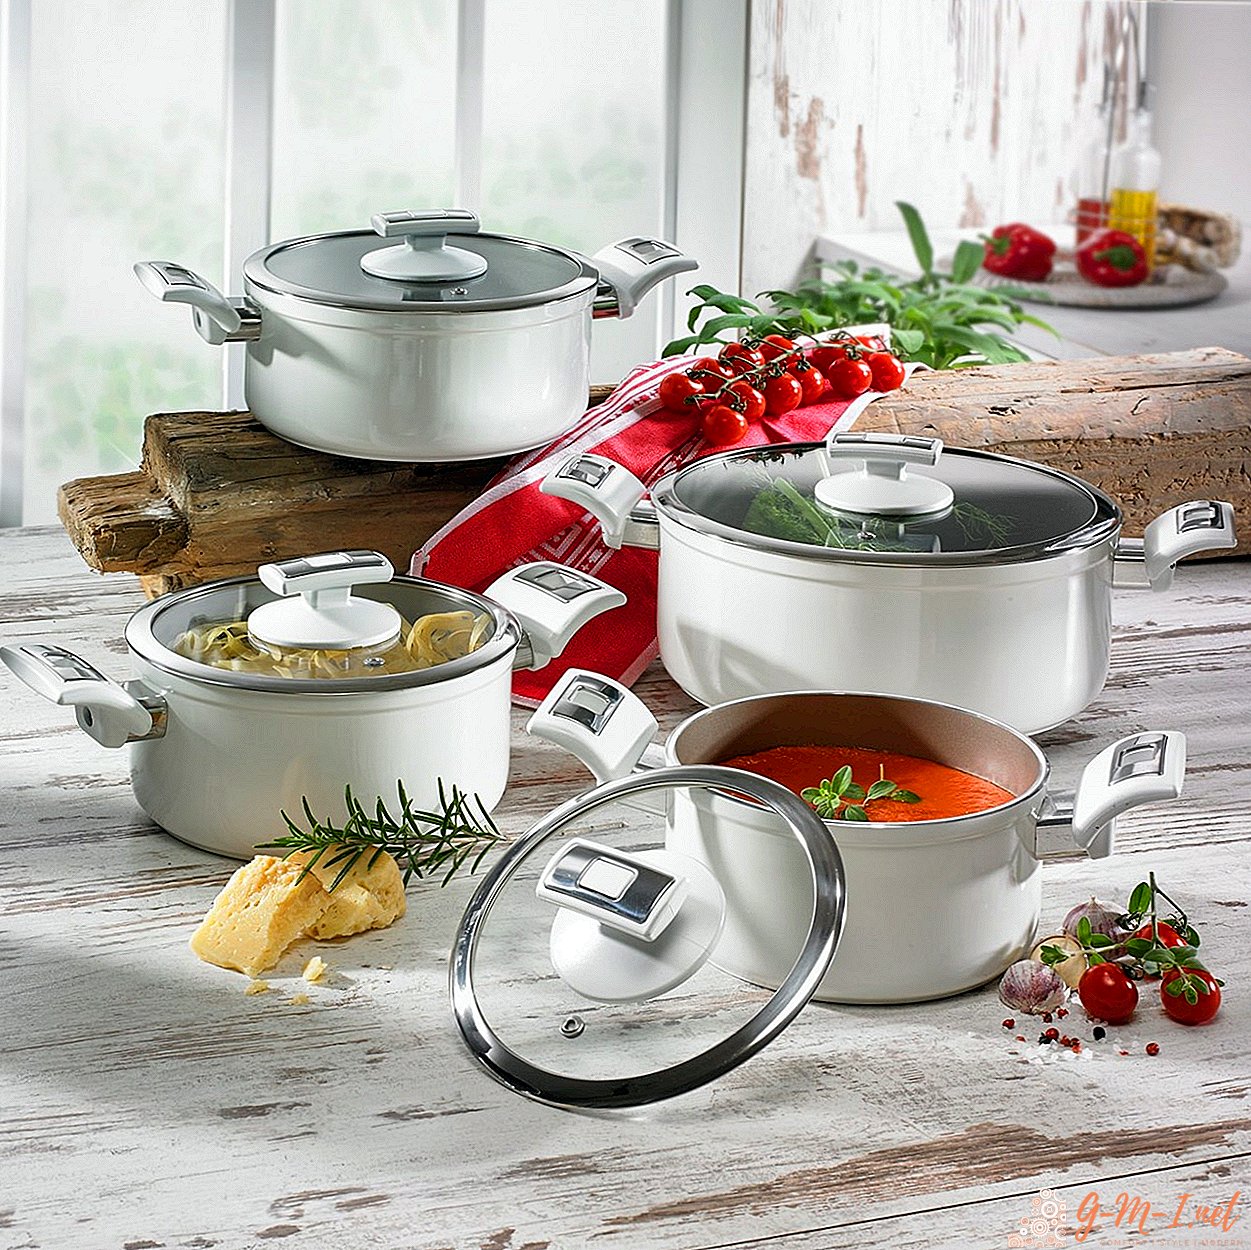 Which pans are better - enameled or stainless steel